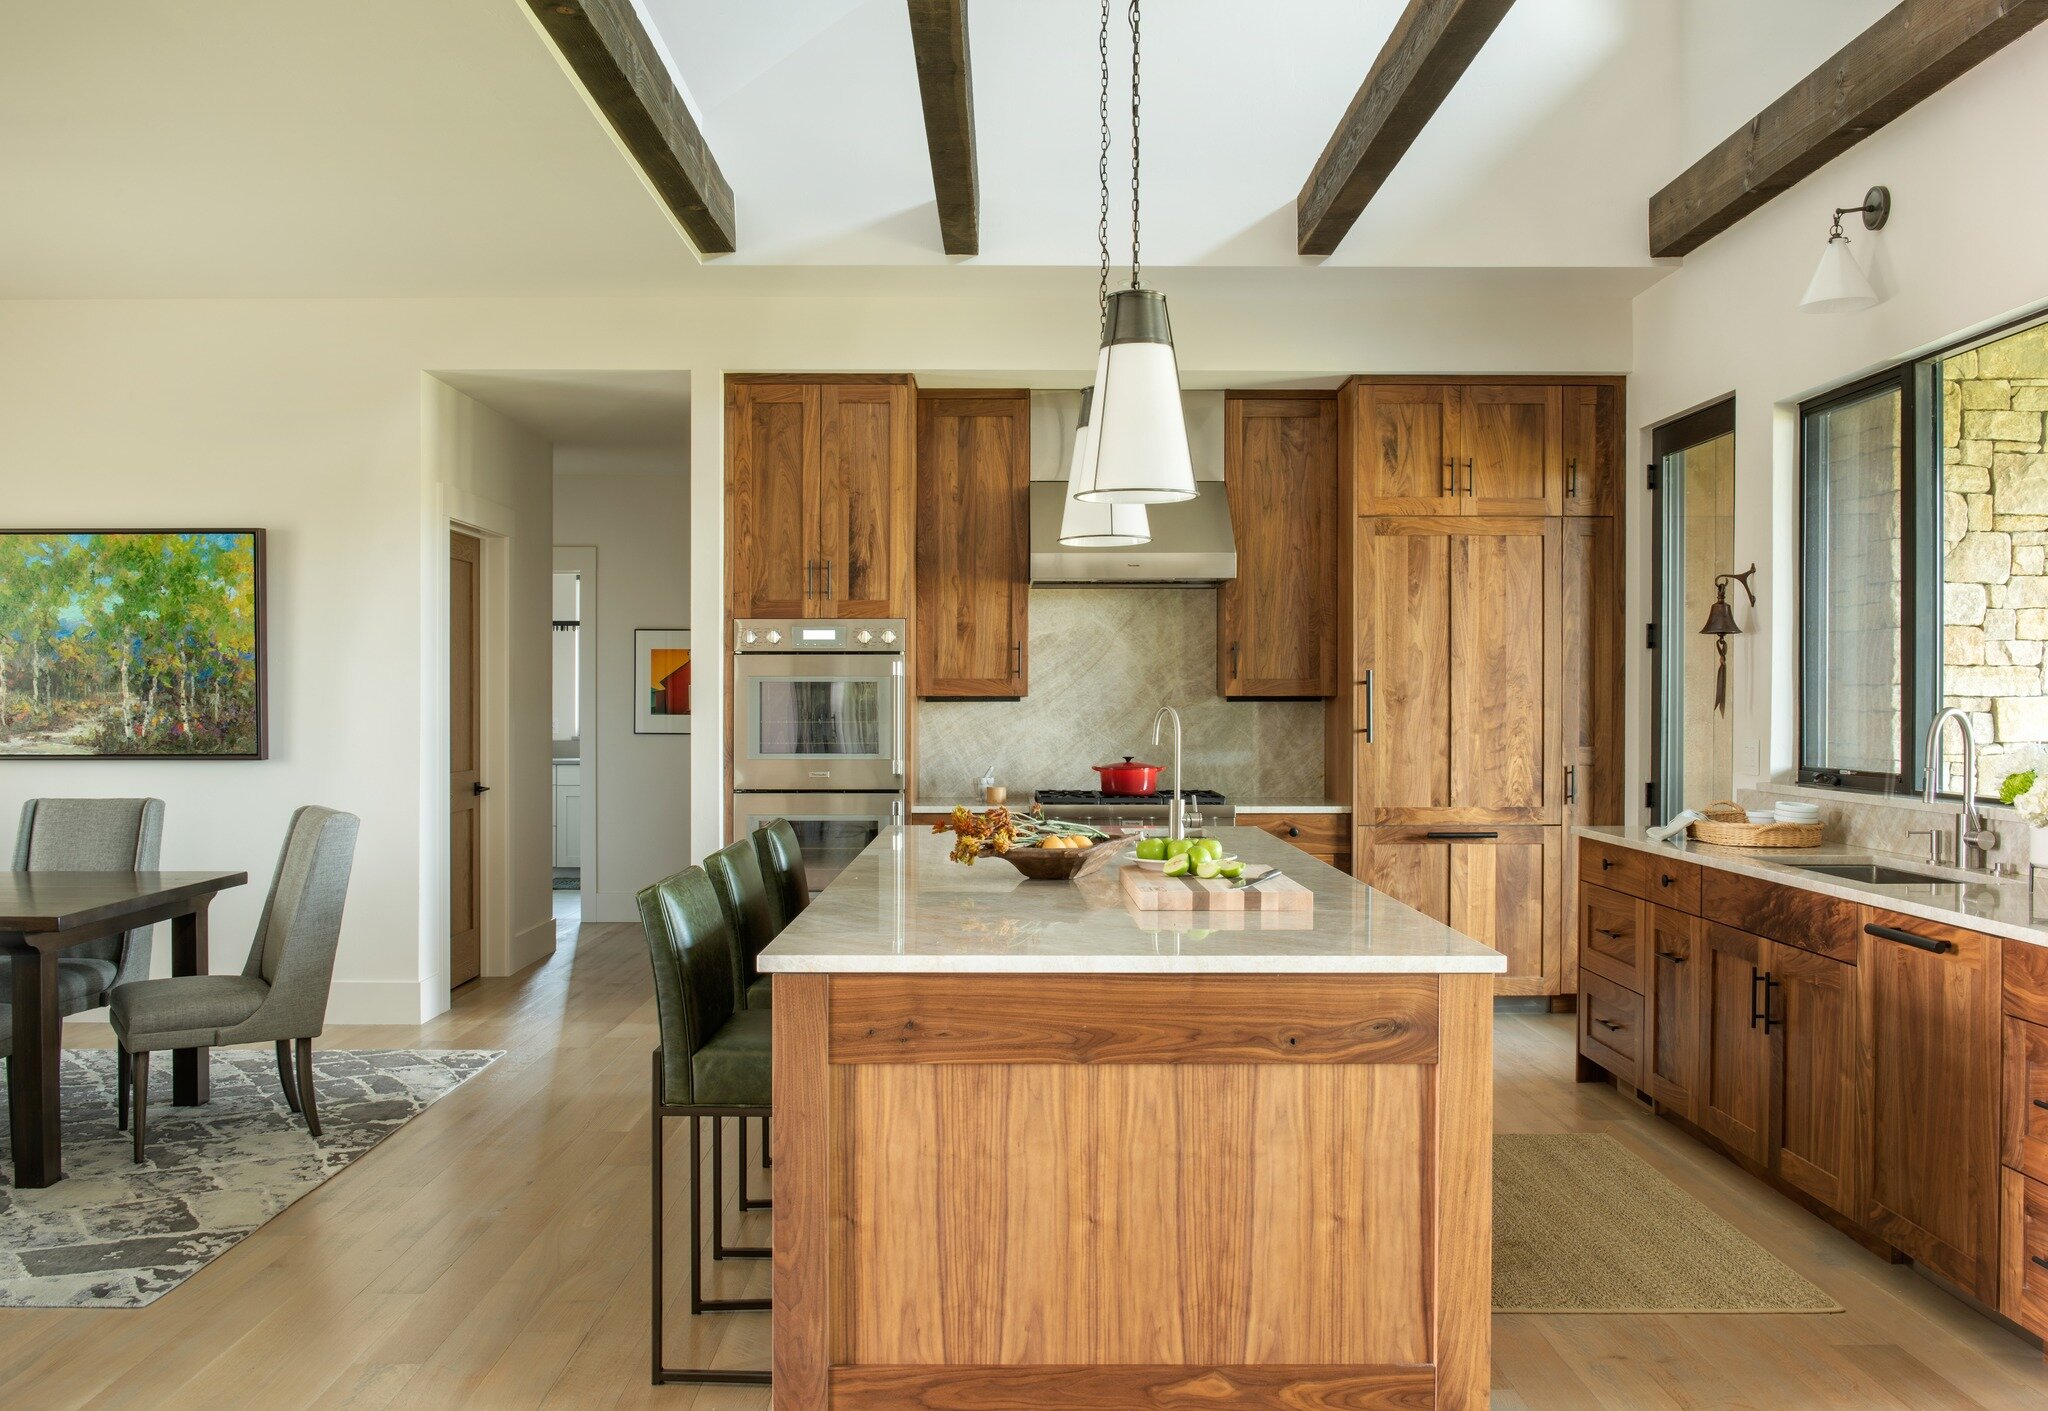 Clean lines, natural materials, and thoughtful design.

This kitchen embodies our architectural philosophy of creating beautiful and functional spaces that elevate daily living.

.

.

#homebuildingprocess #montanahomebuilder #dreamhomeideas #archite